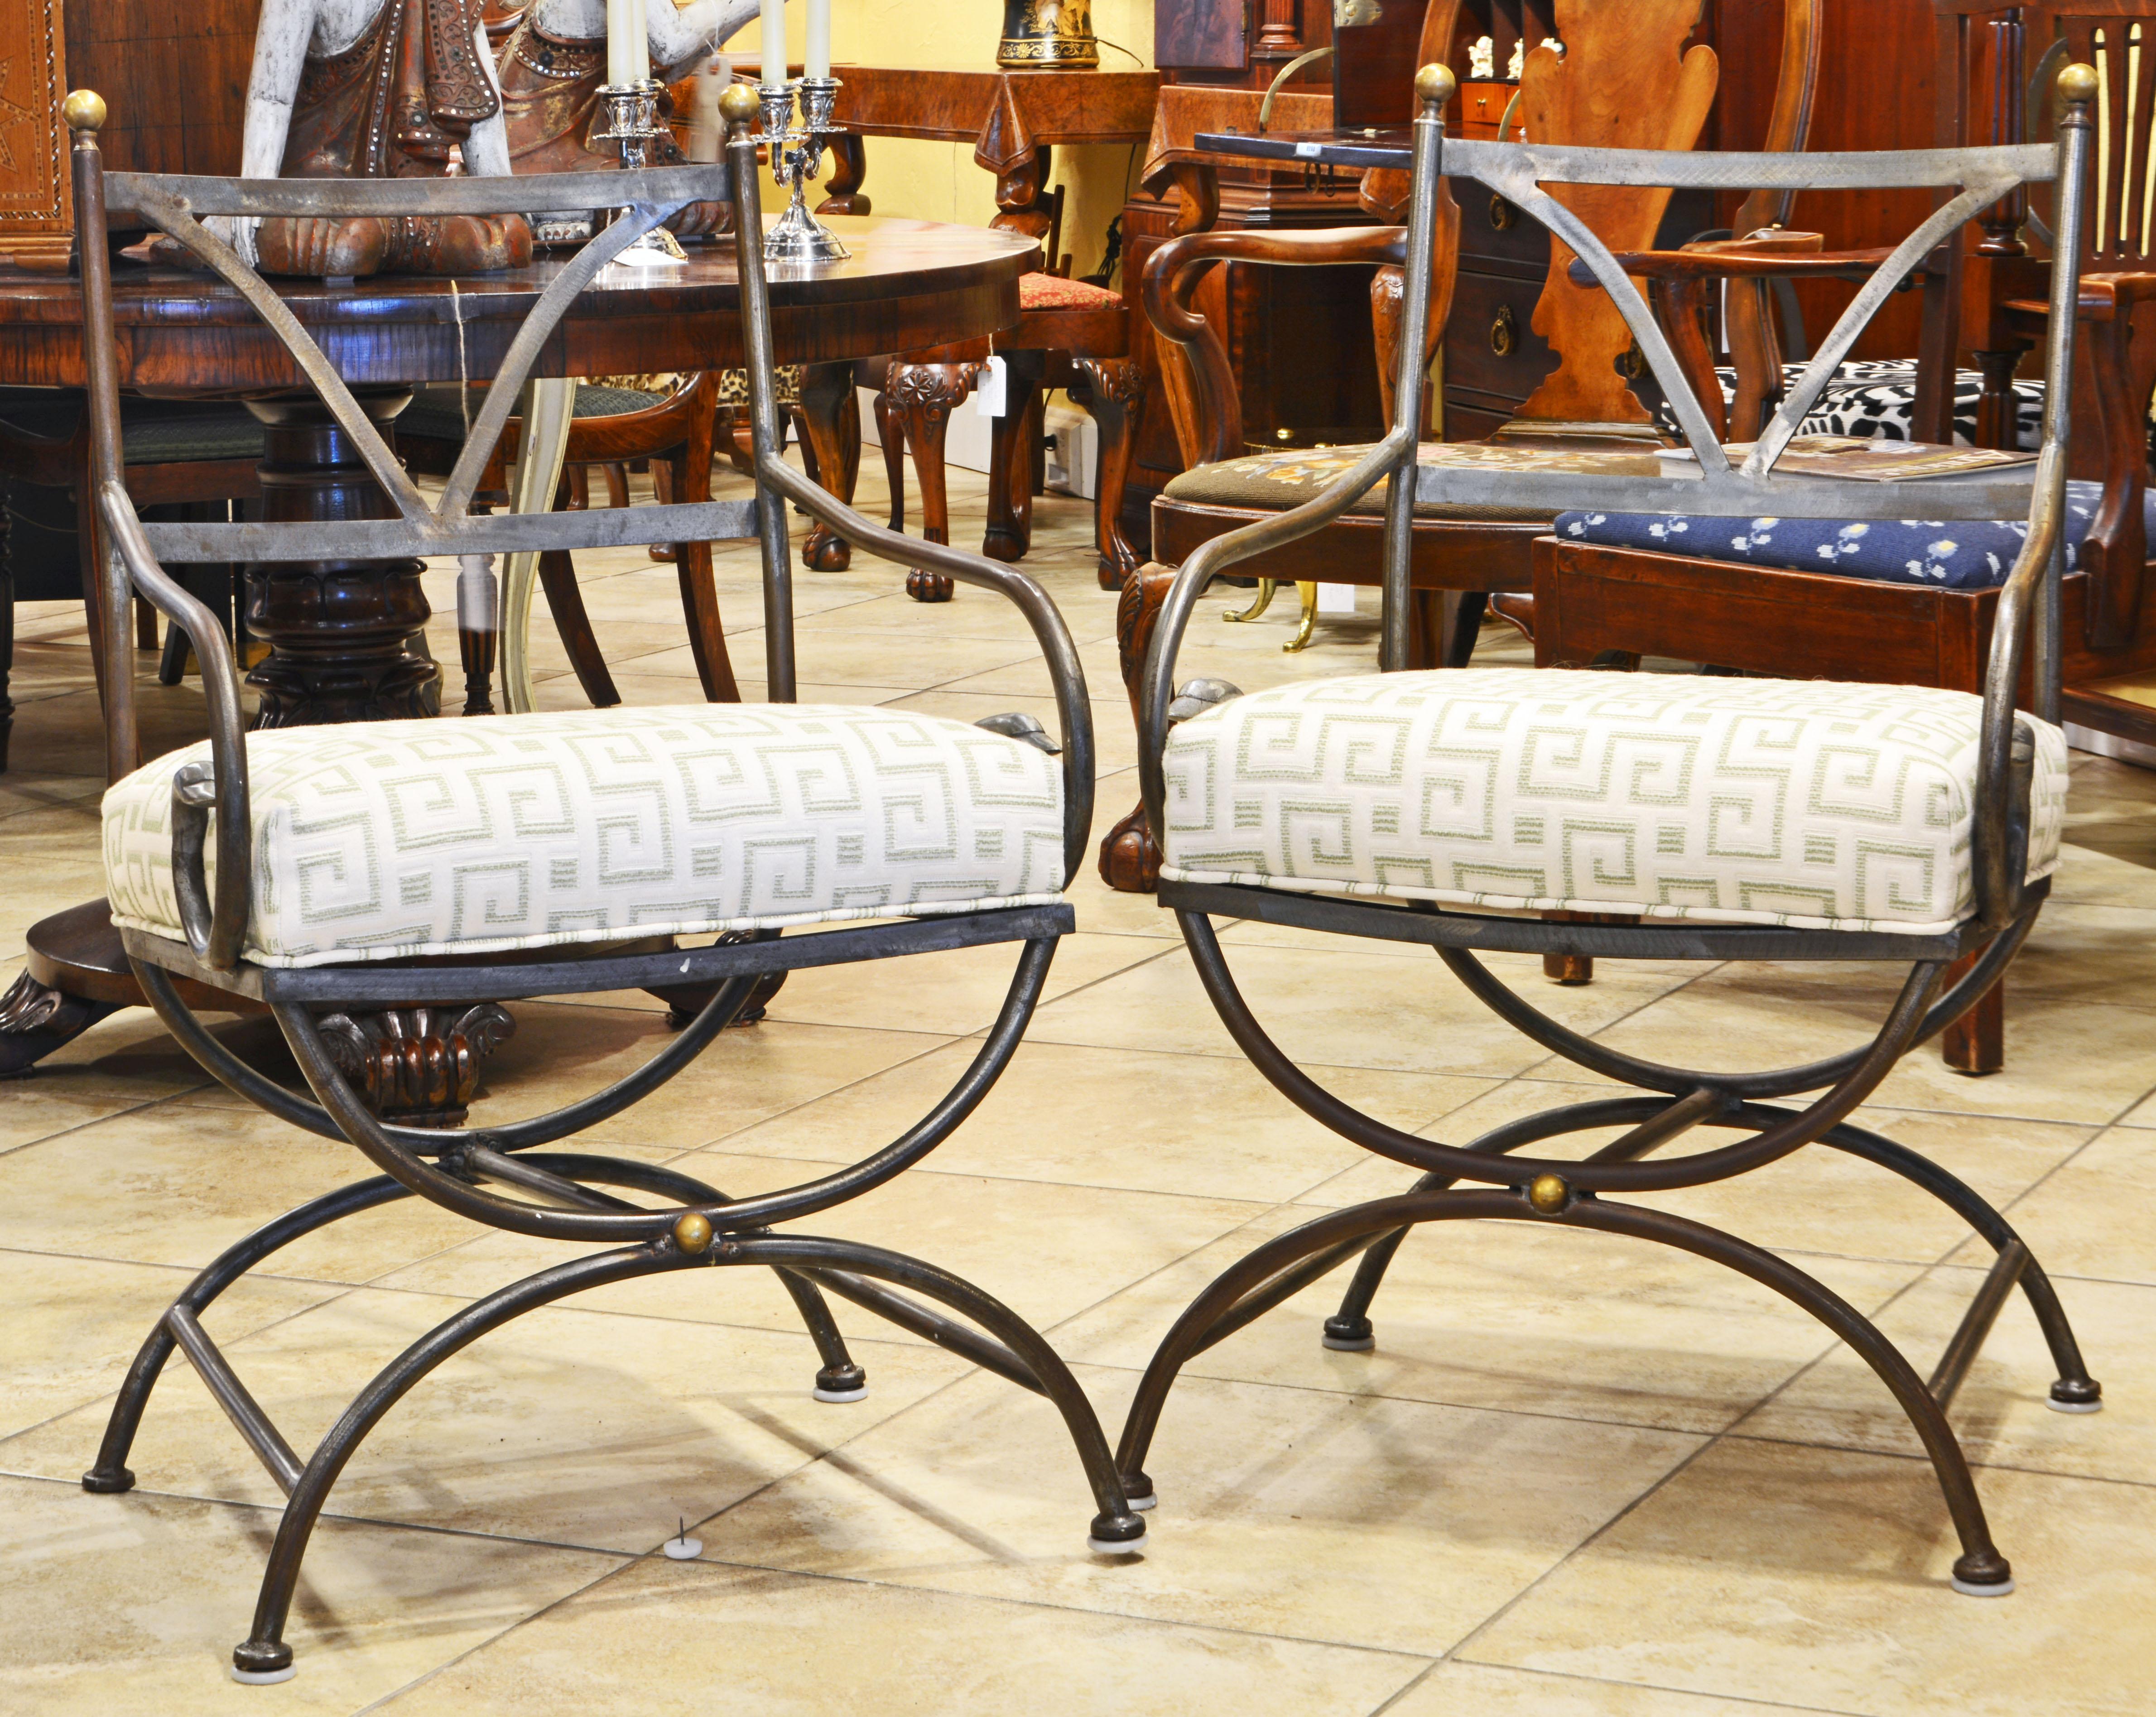 These wrought iron armchairs are designed in the classical curule style and feature curved armrests ending in stylized swan heads. The back rests are accented by mounted brass finials. The seats are upholstered and covered with a Greek Key themed